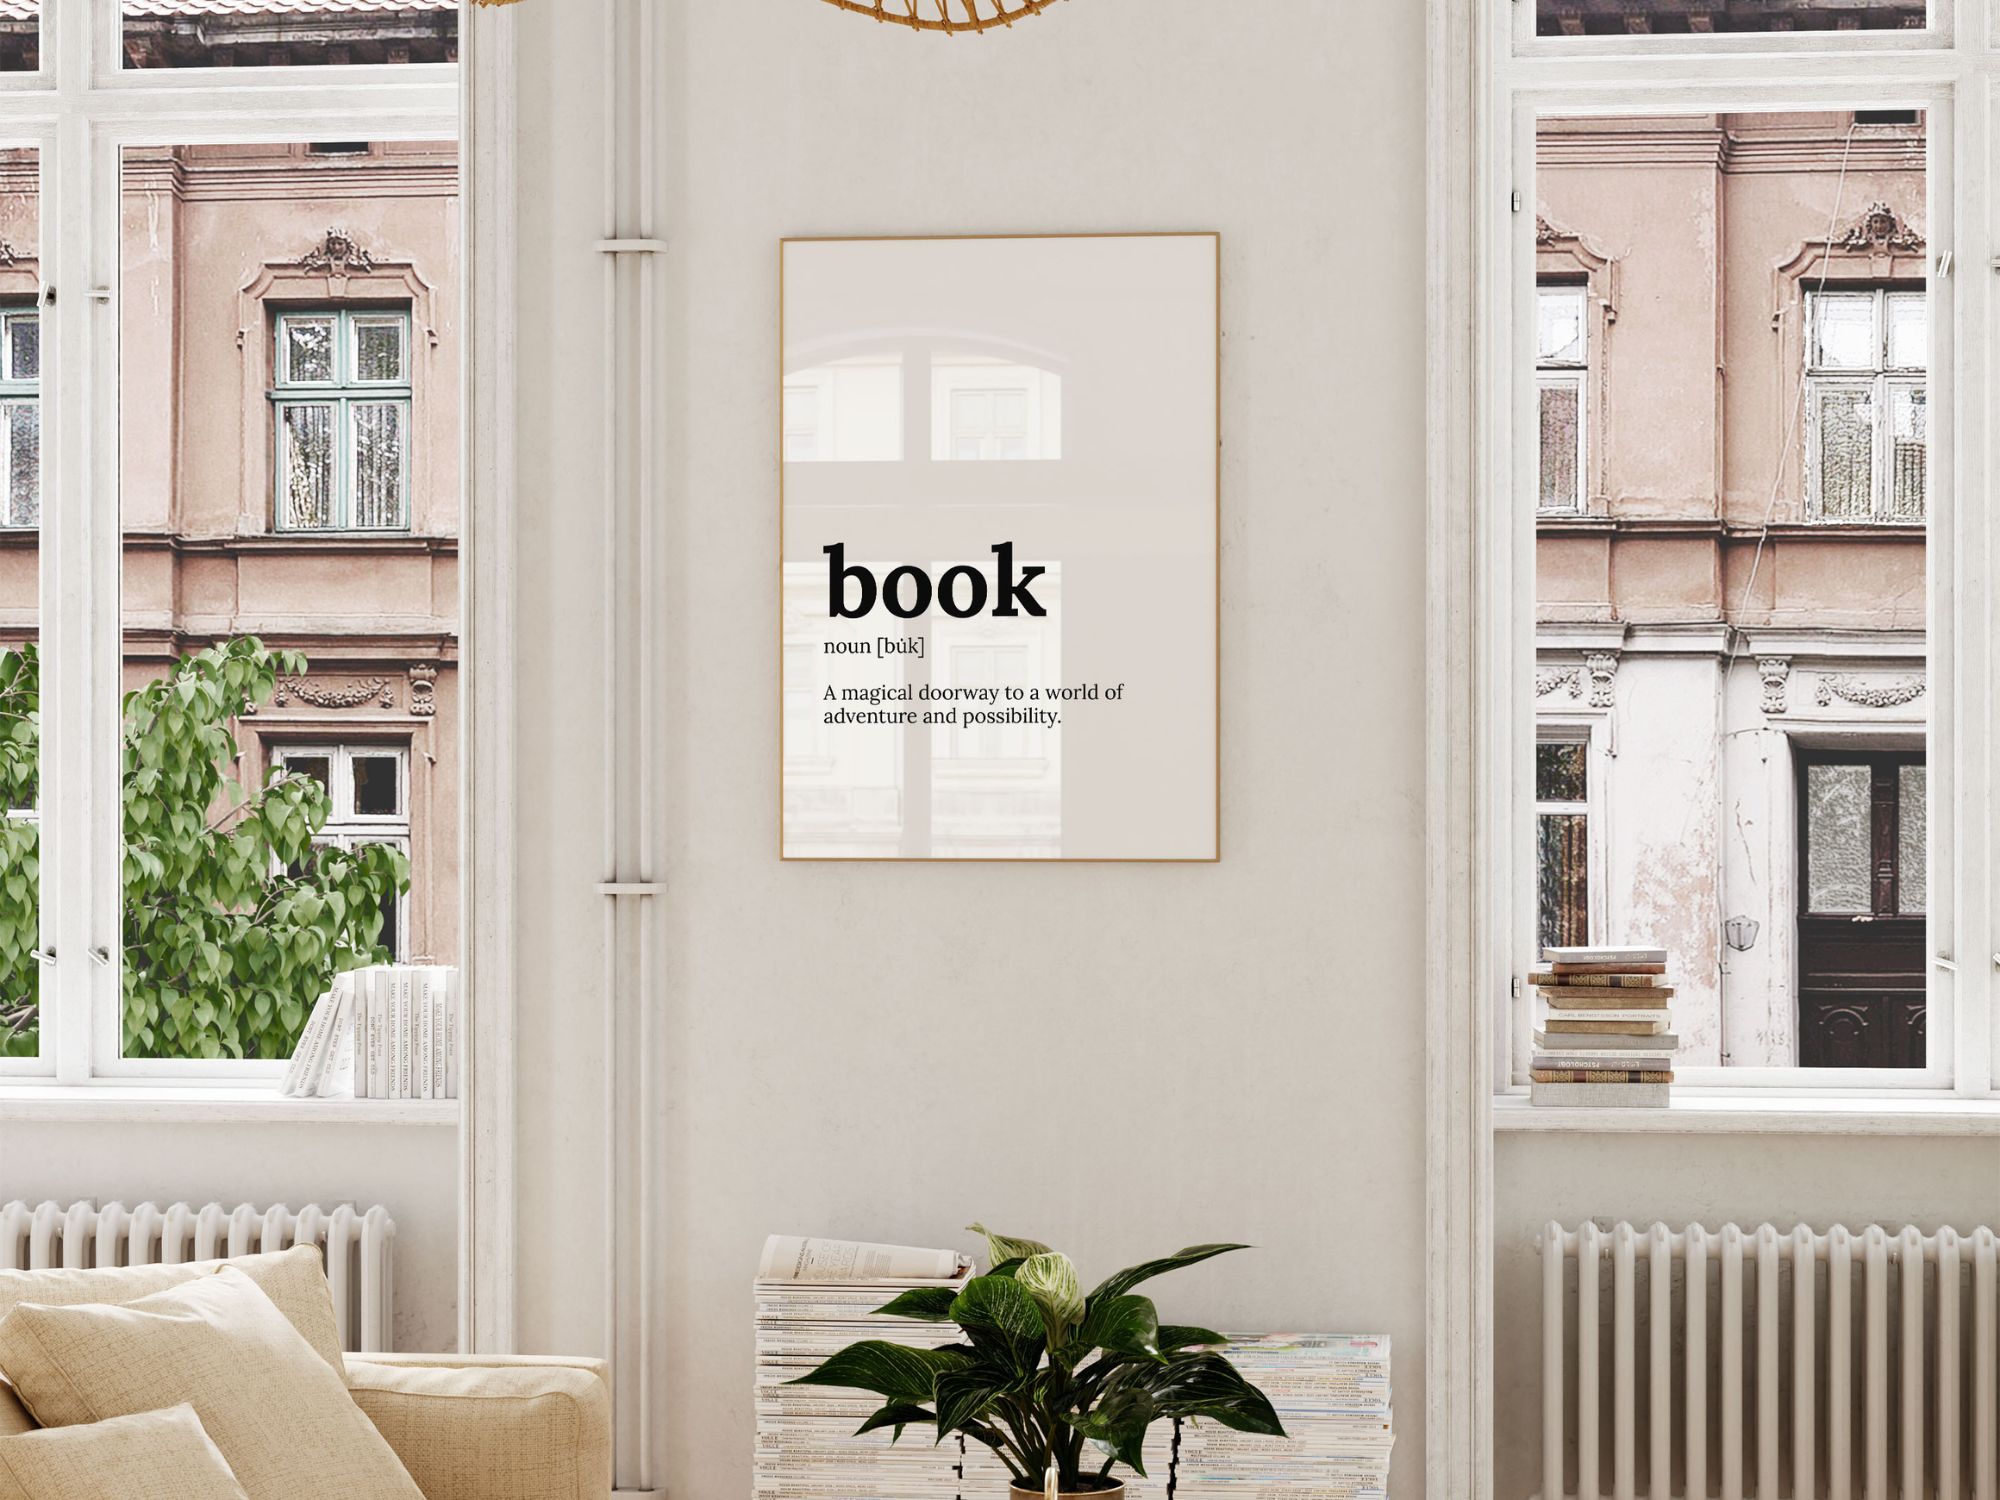 book definition dictionary art poster in a living room